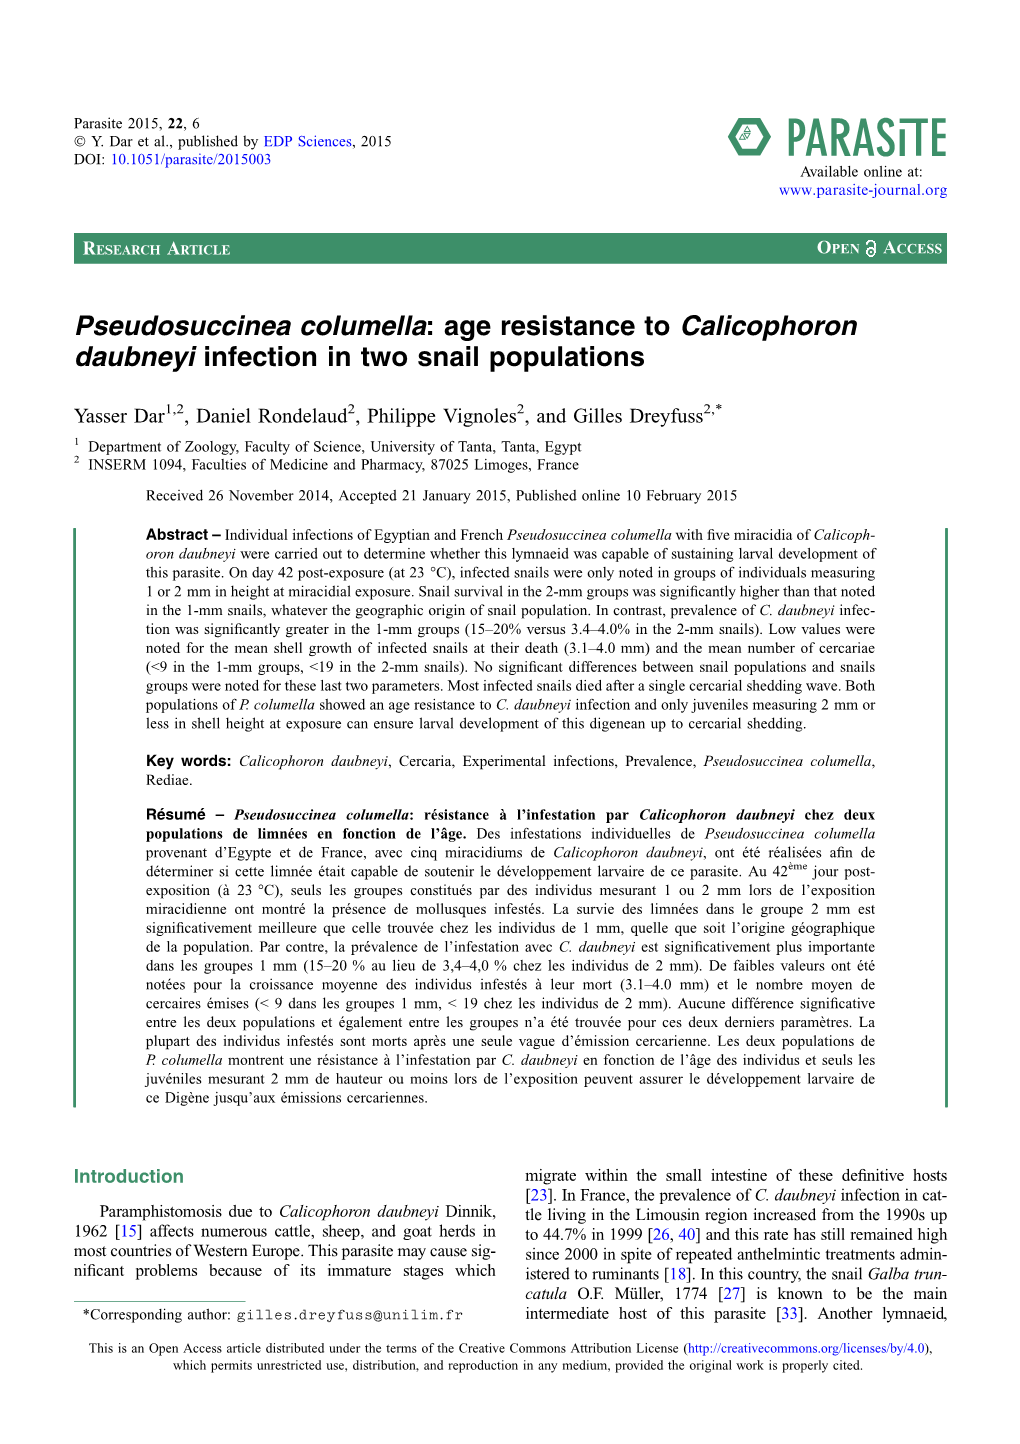 Pseudosuccinea Columella: Age Resistance to Calicophoron Daubneyi Infection in Two Snail Populations